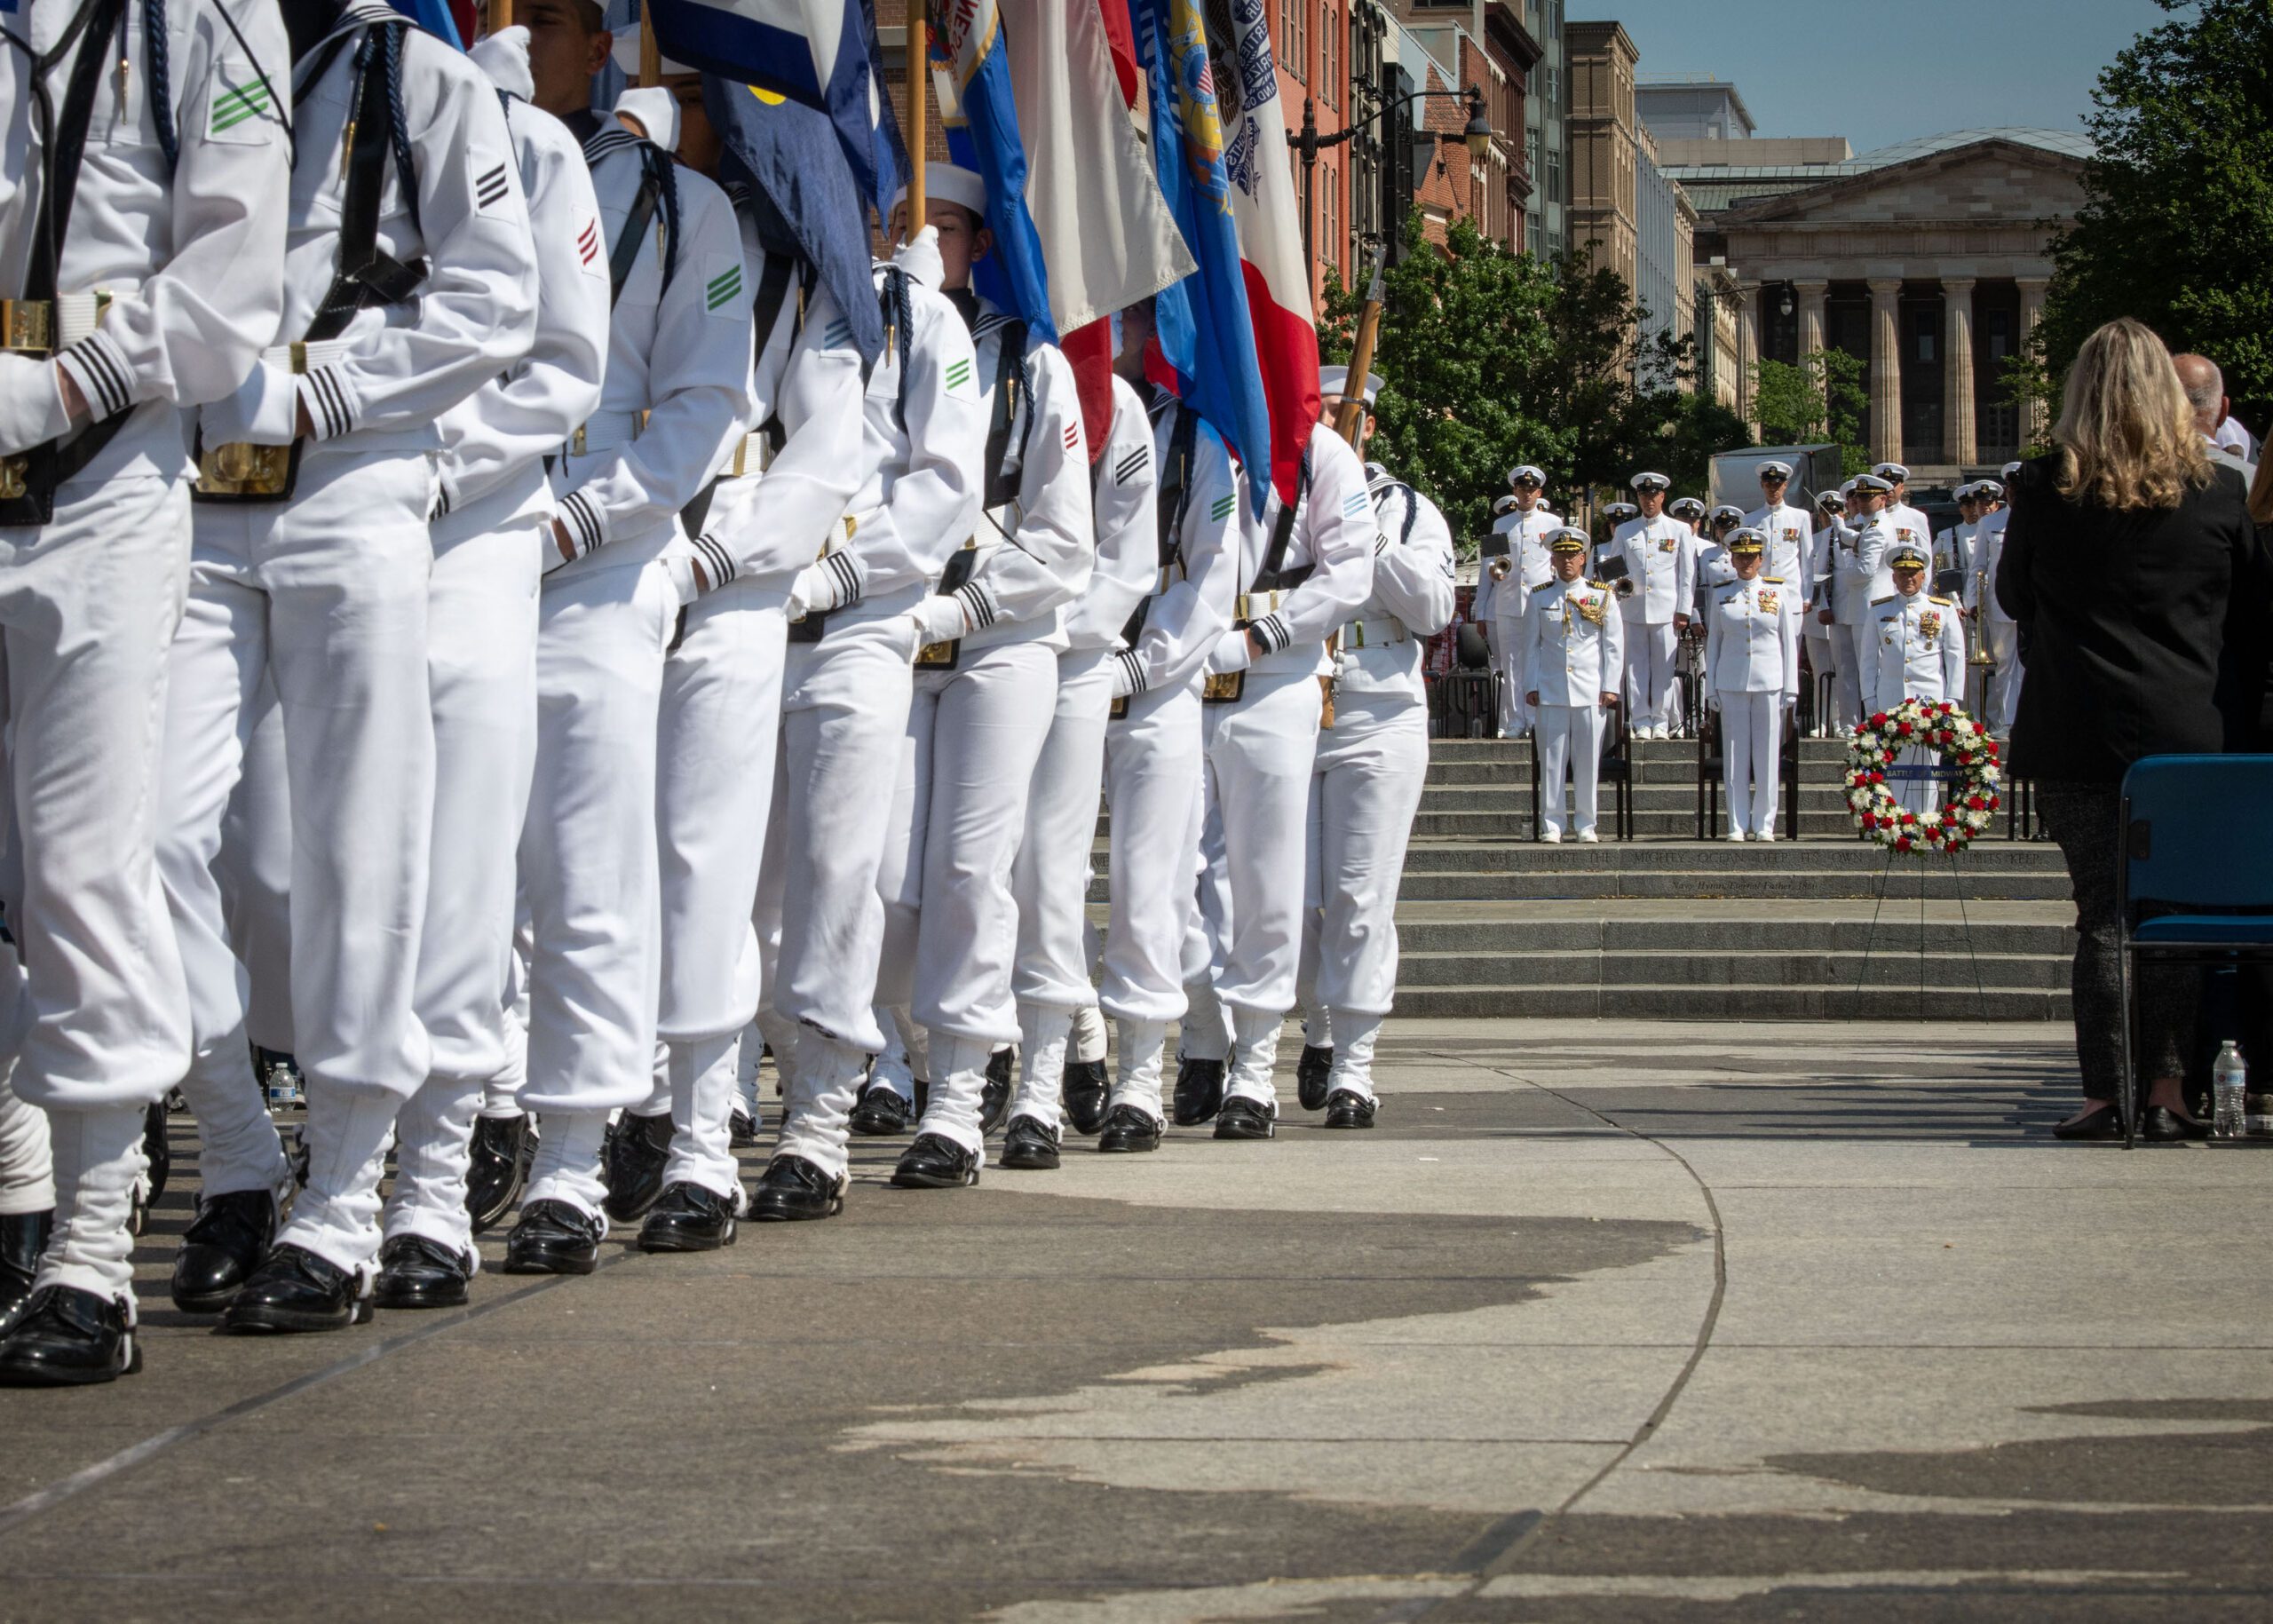 US Navy Admirals and a naval color guard at A Ceremony in Washington. Photo by USN